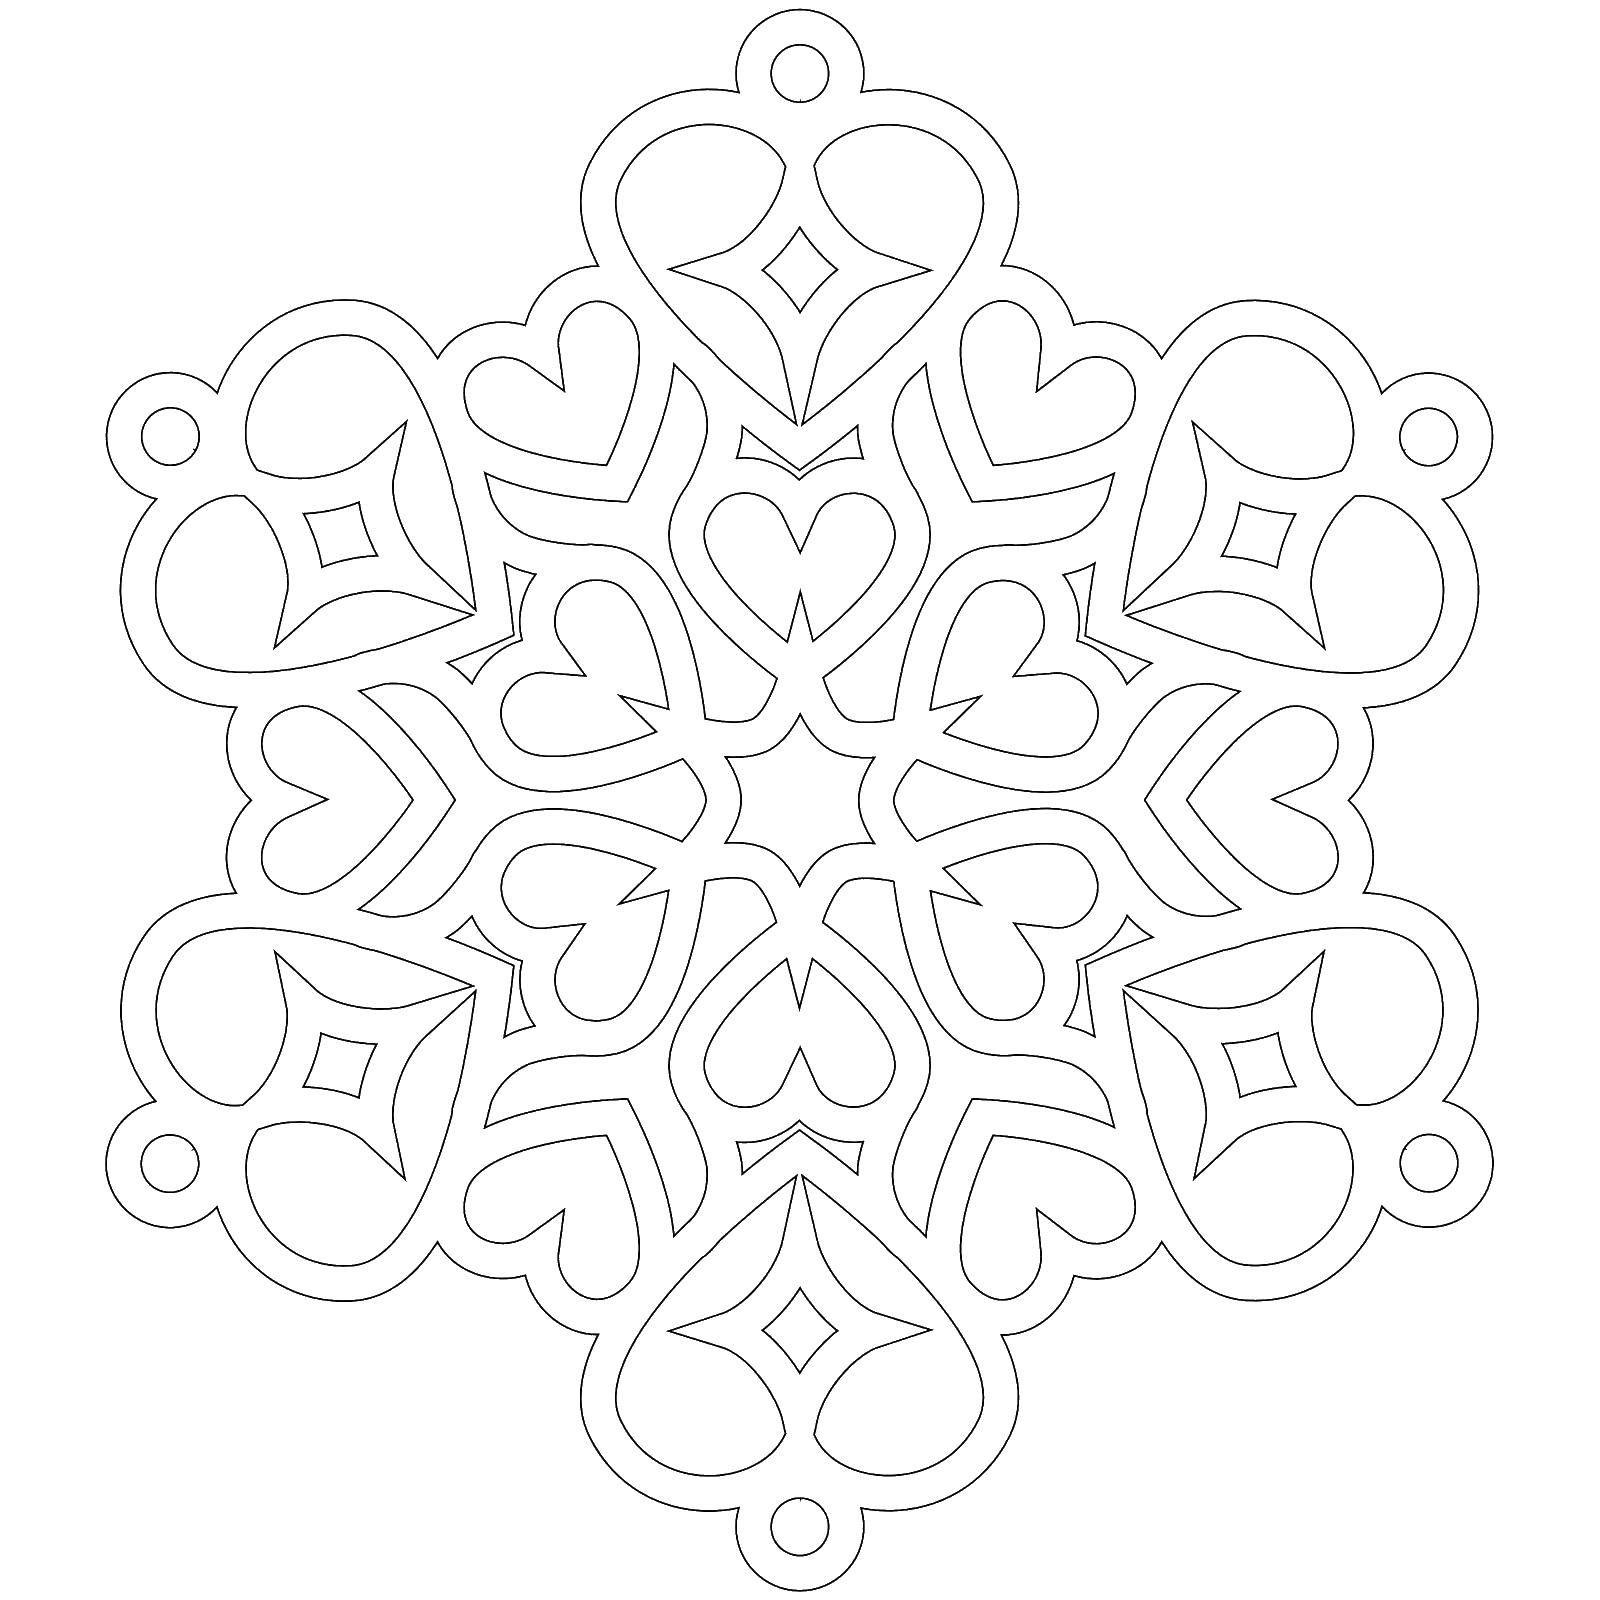 Coloring Beautiful painted pattern, coloring antistress. Category patterns. Tags:  pattern, figure, antistress.